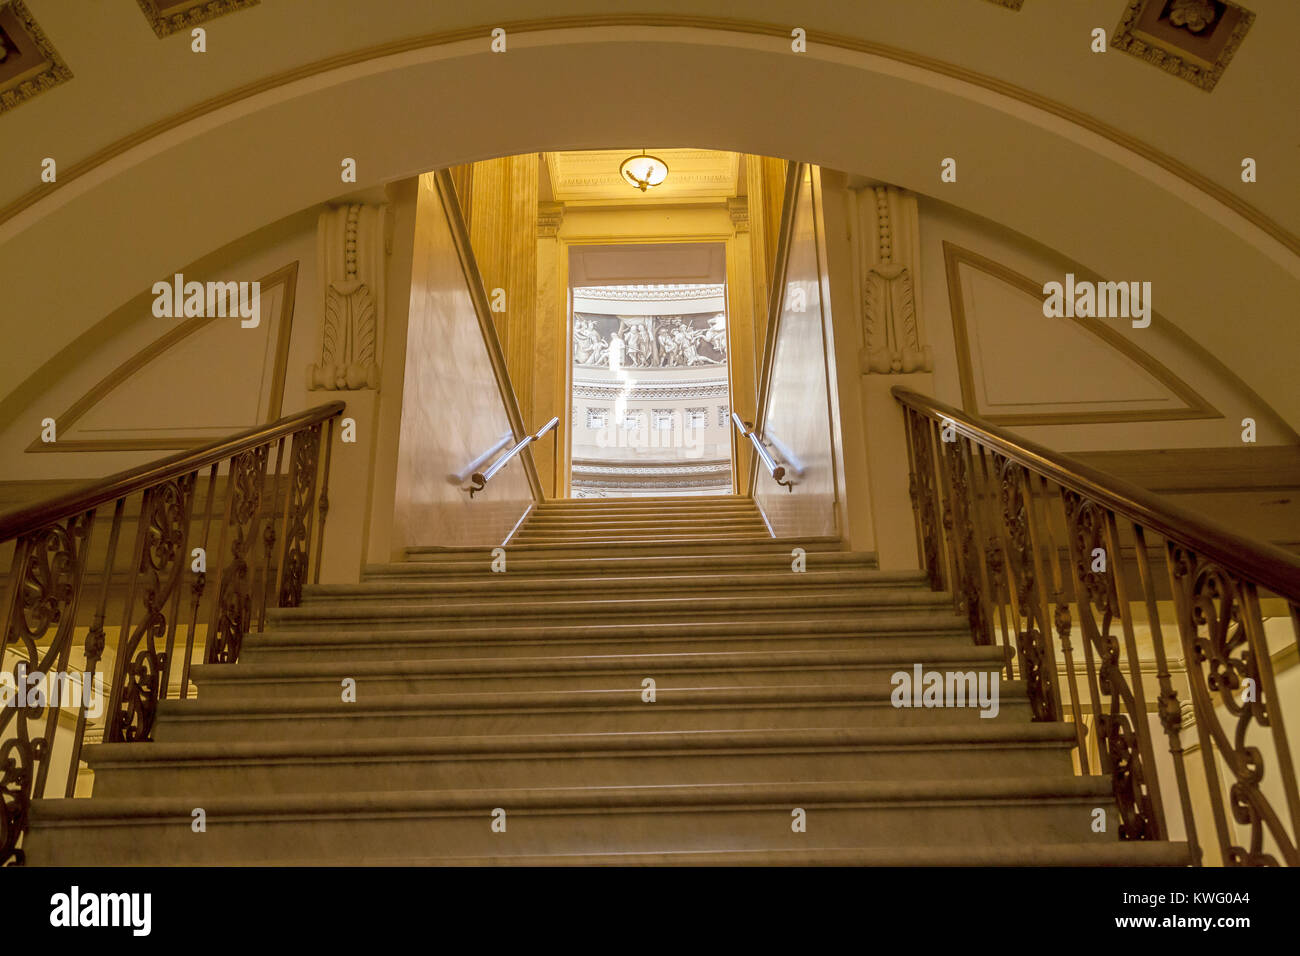 Staircase leading to the rotunda in the US Capitol Hill building, Washington DC, USA Stock Photo